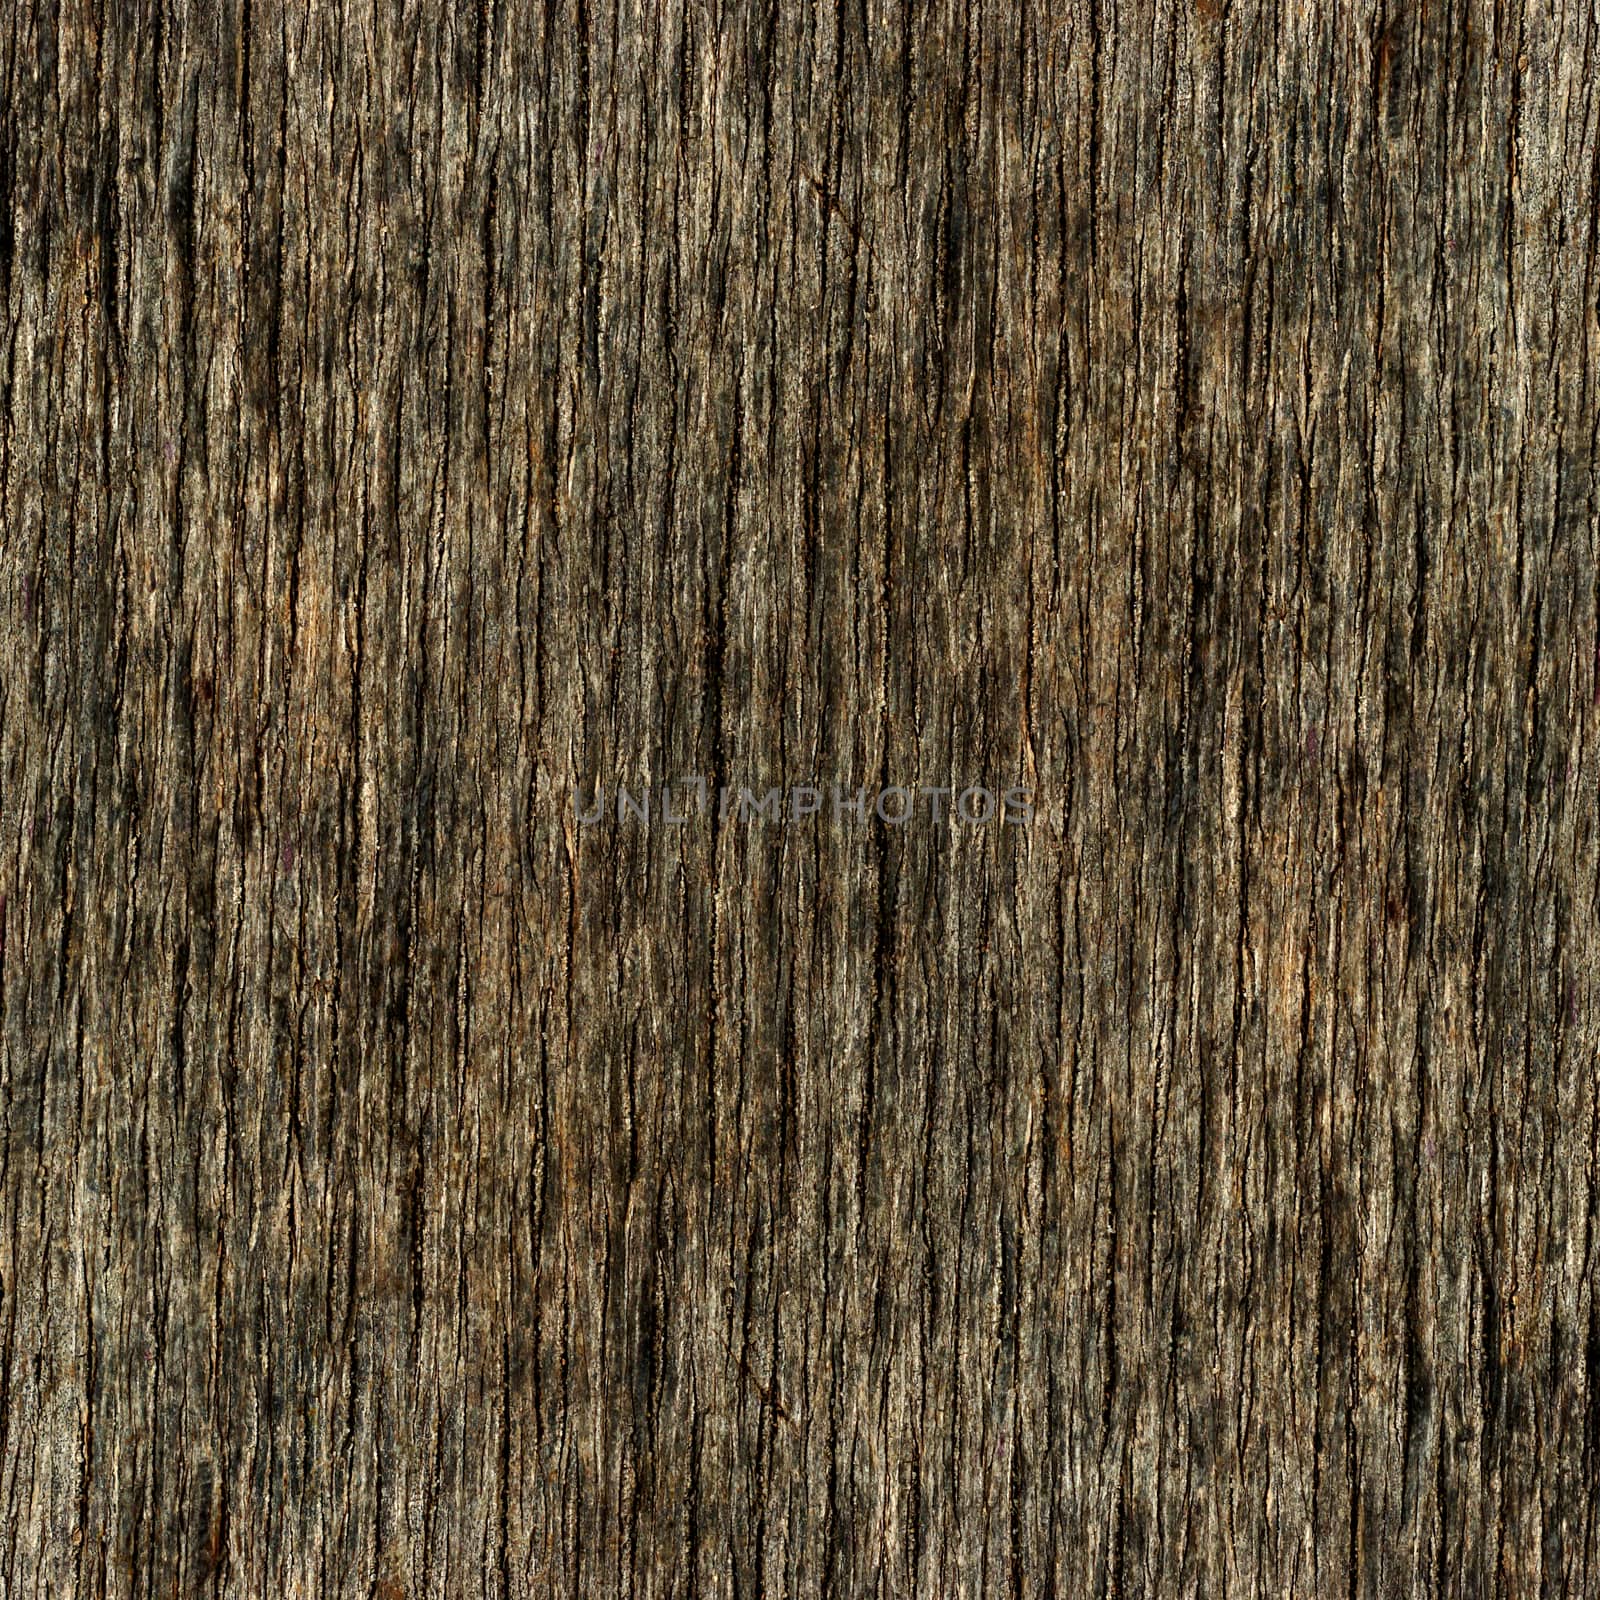 old wooden surface.